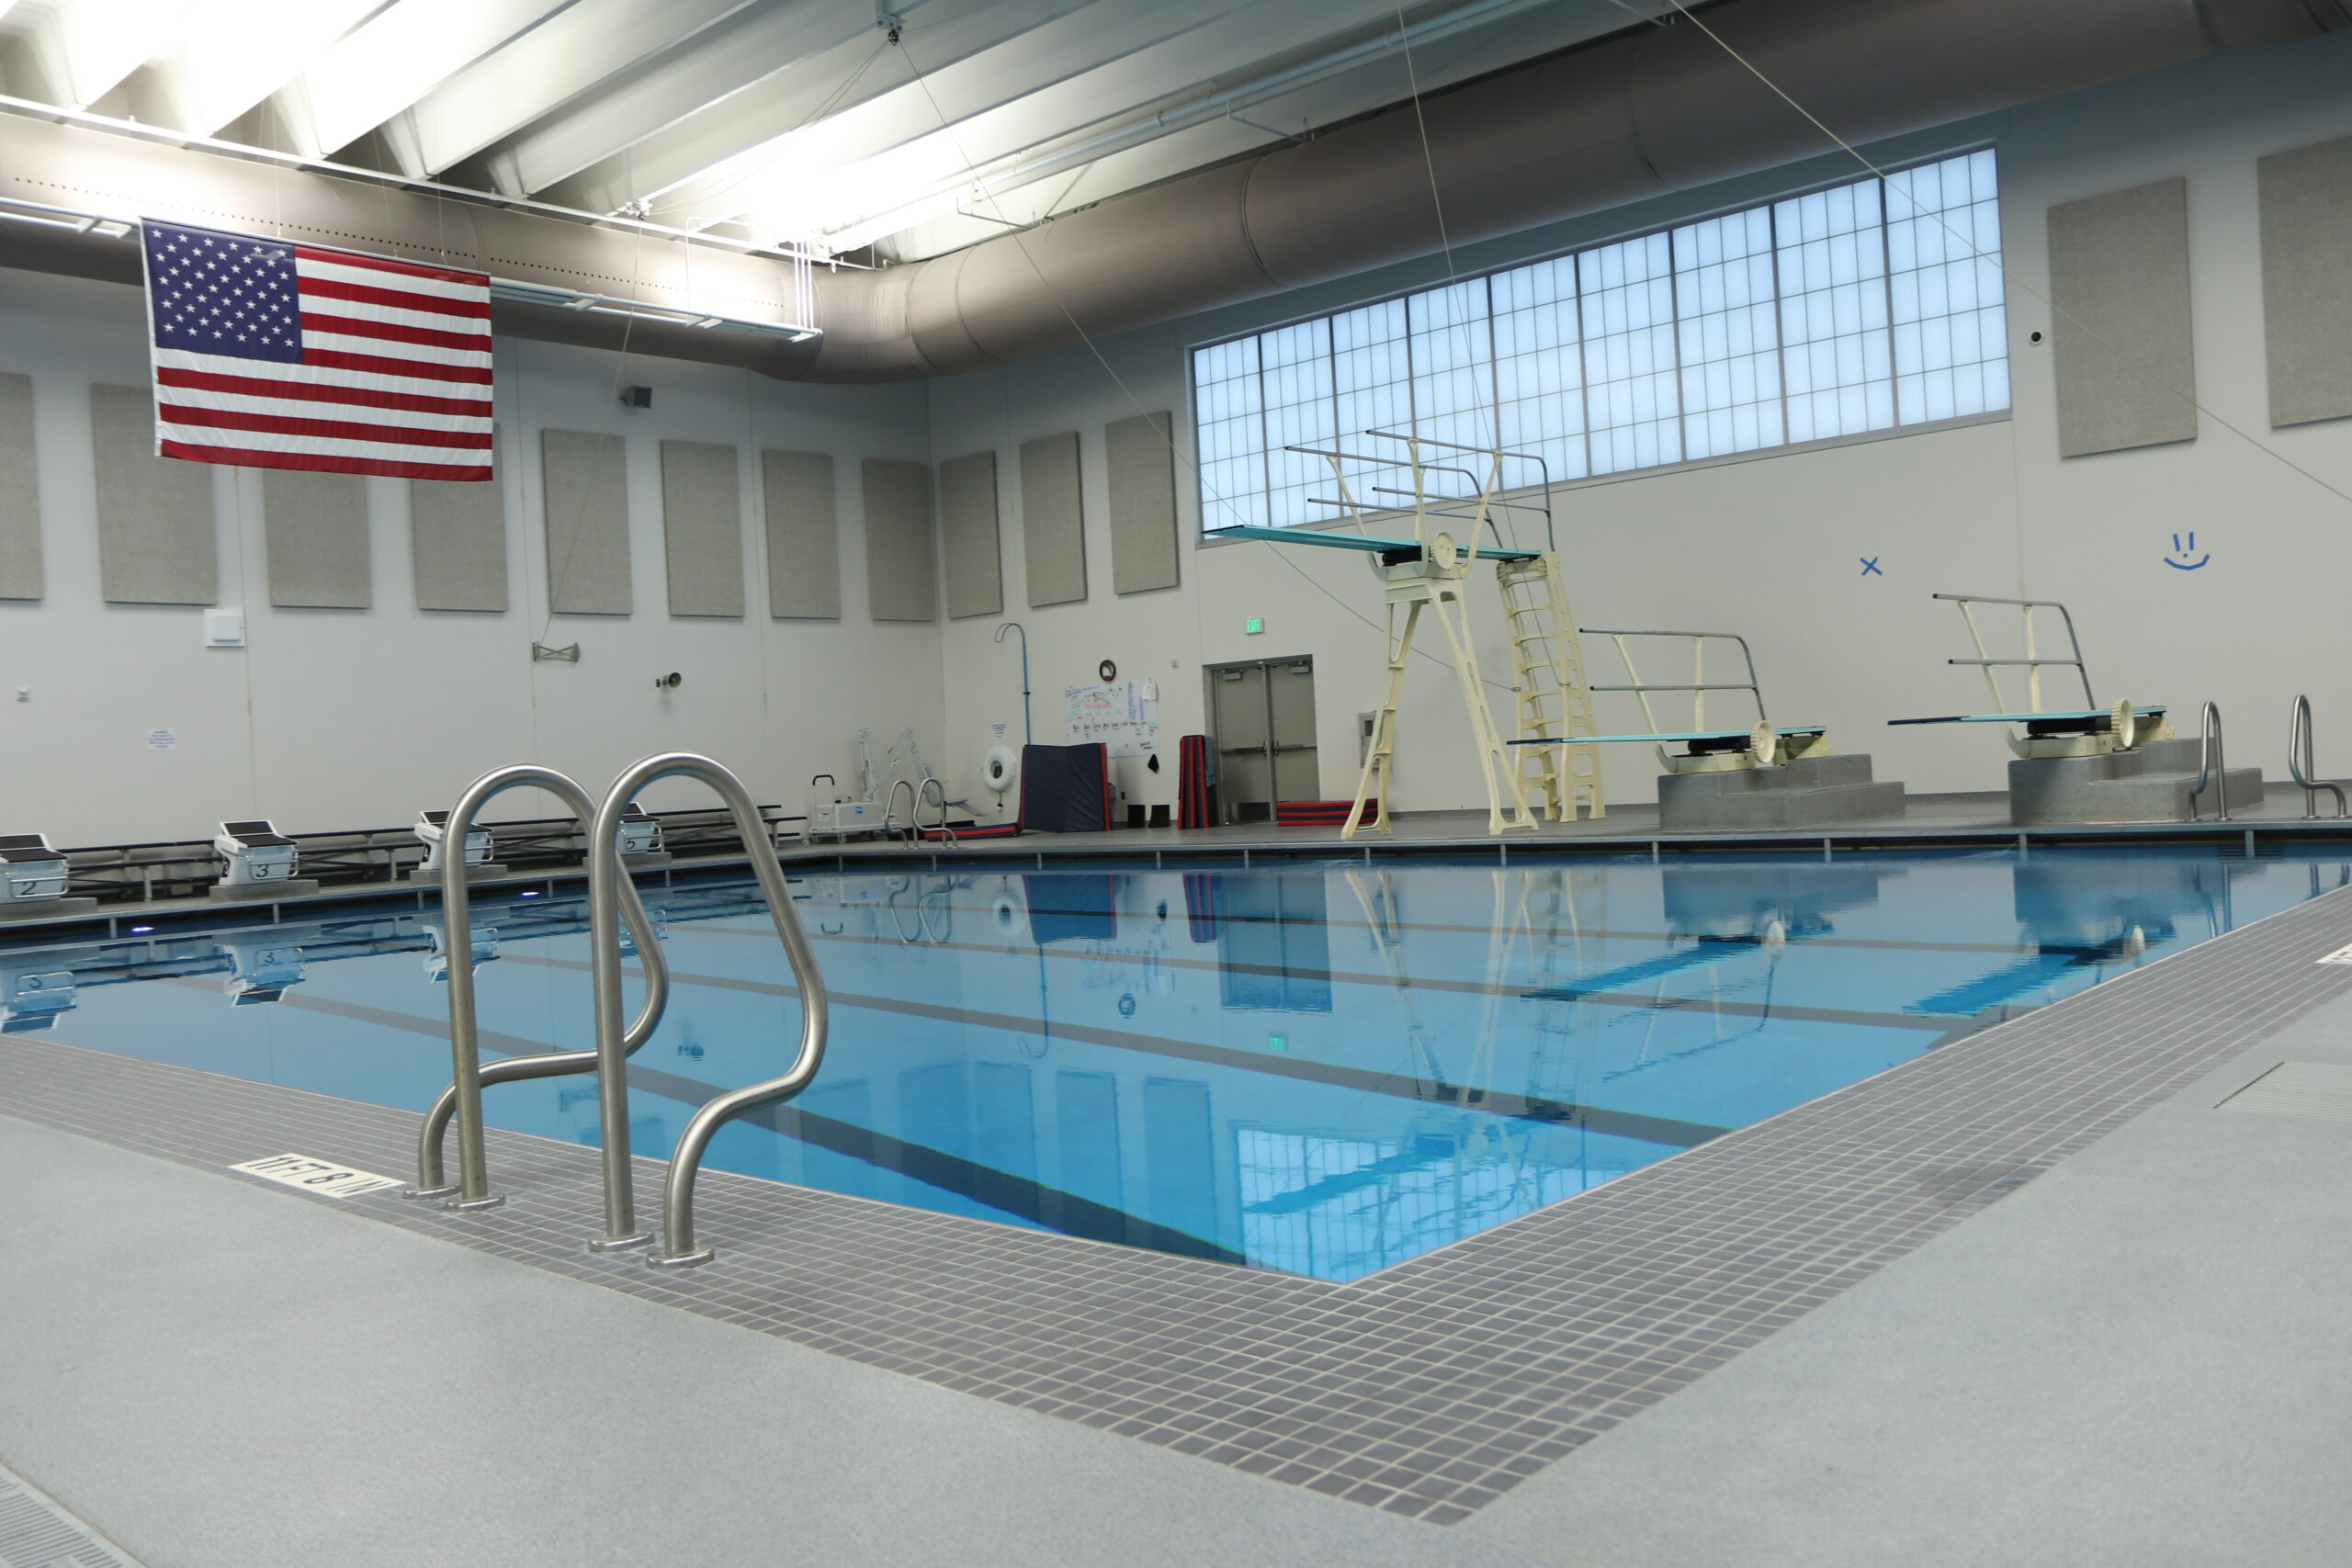 Lakeville Achieves the Perfect Pool - Environment Through Outdoor Air